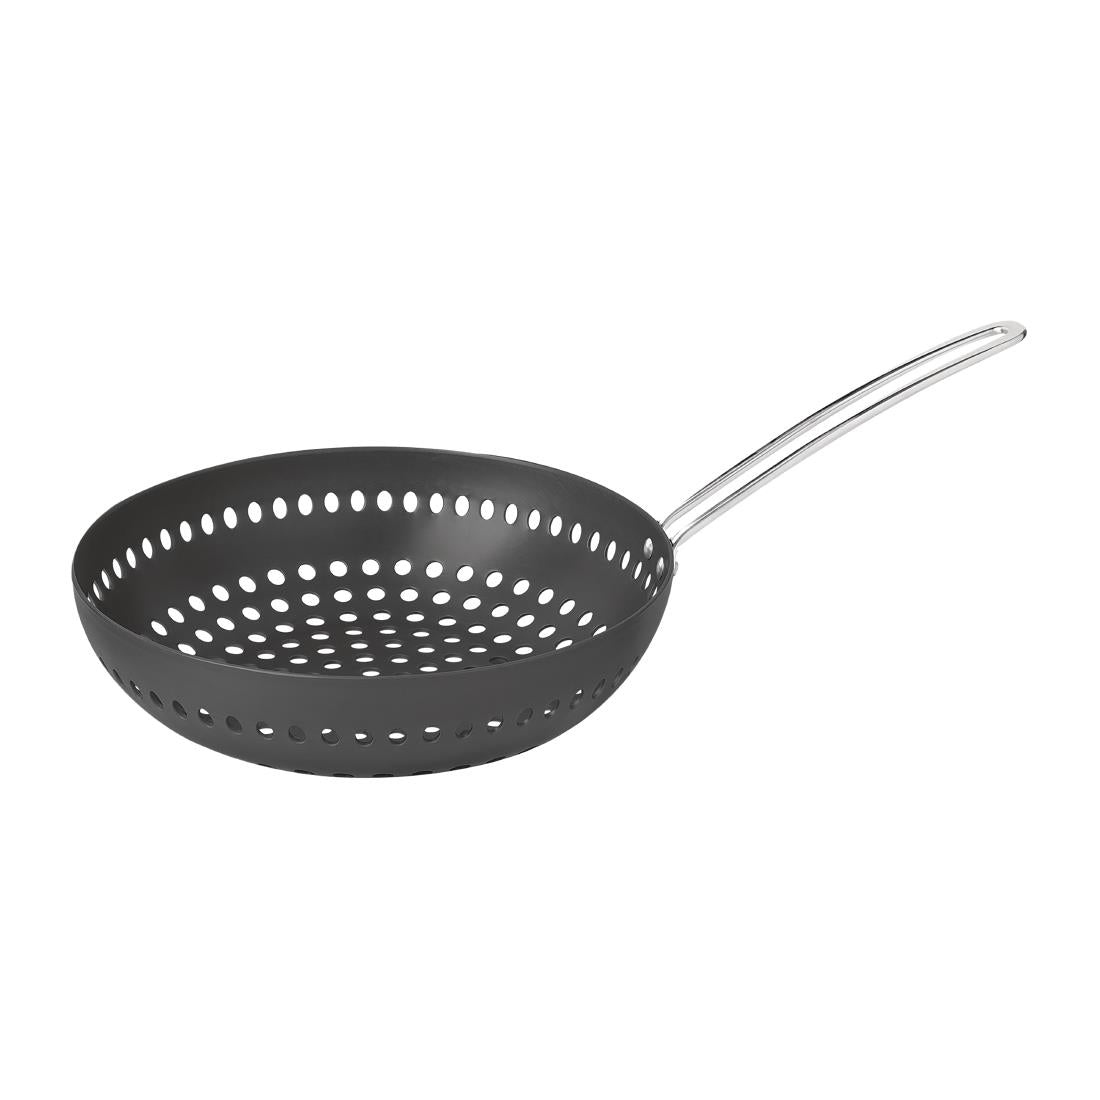 DW699 Tramontina Perforated Barbecue Wok 26 cm JD Catering Equipment Solutions Ltd